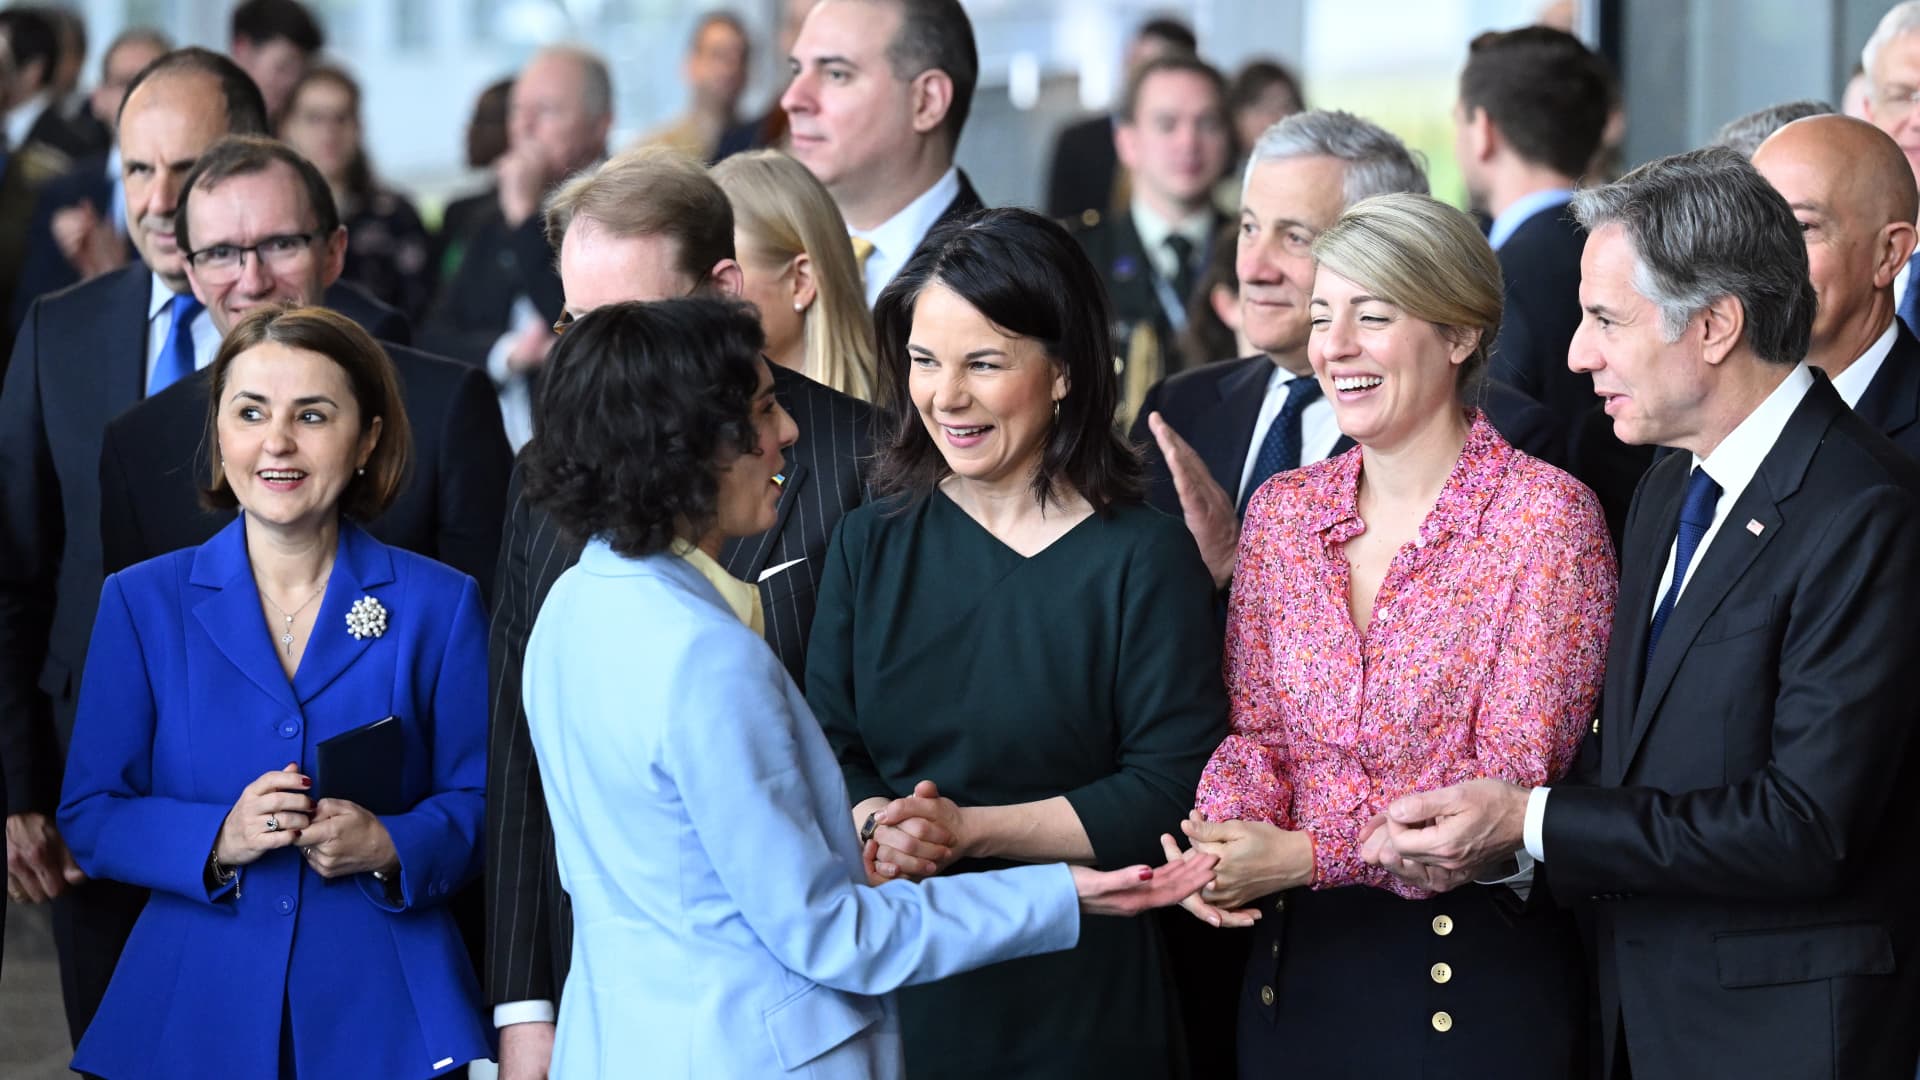 Belgian Foreign Minister Hadja Lahbib (2nd L), German Foreign Minister Annalena Baerbock (3rd R), Canadian Foreign Minister Melanie Joly (2nd R), US Secretary of State Antony Blinken (R) attend NATO's 75th anniversary ceremony, held in the gathering place called 'Agora' at the NATO headquarters in Brussels, Belgium on April 4, 2024. 